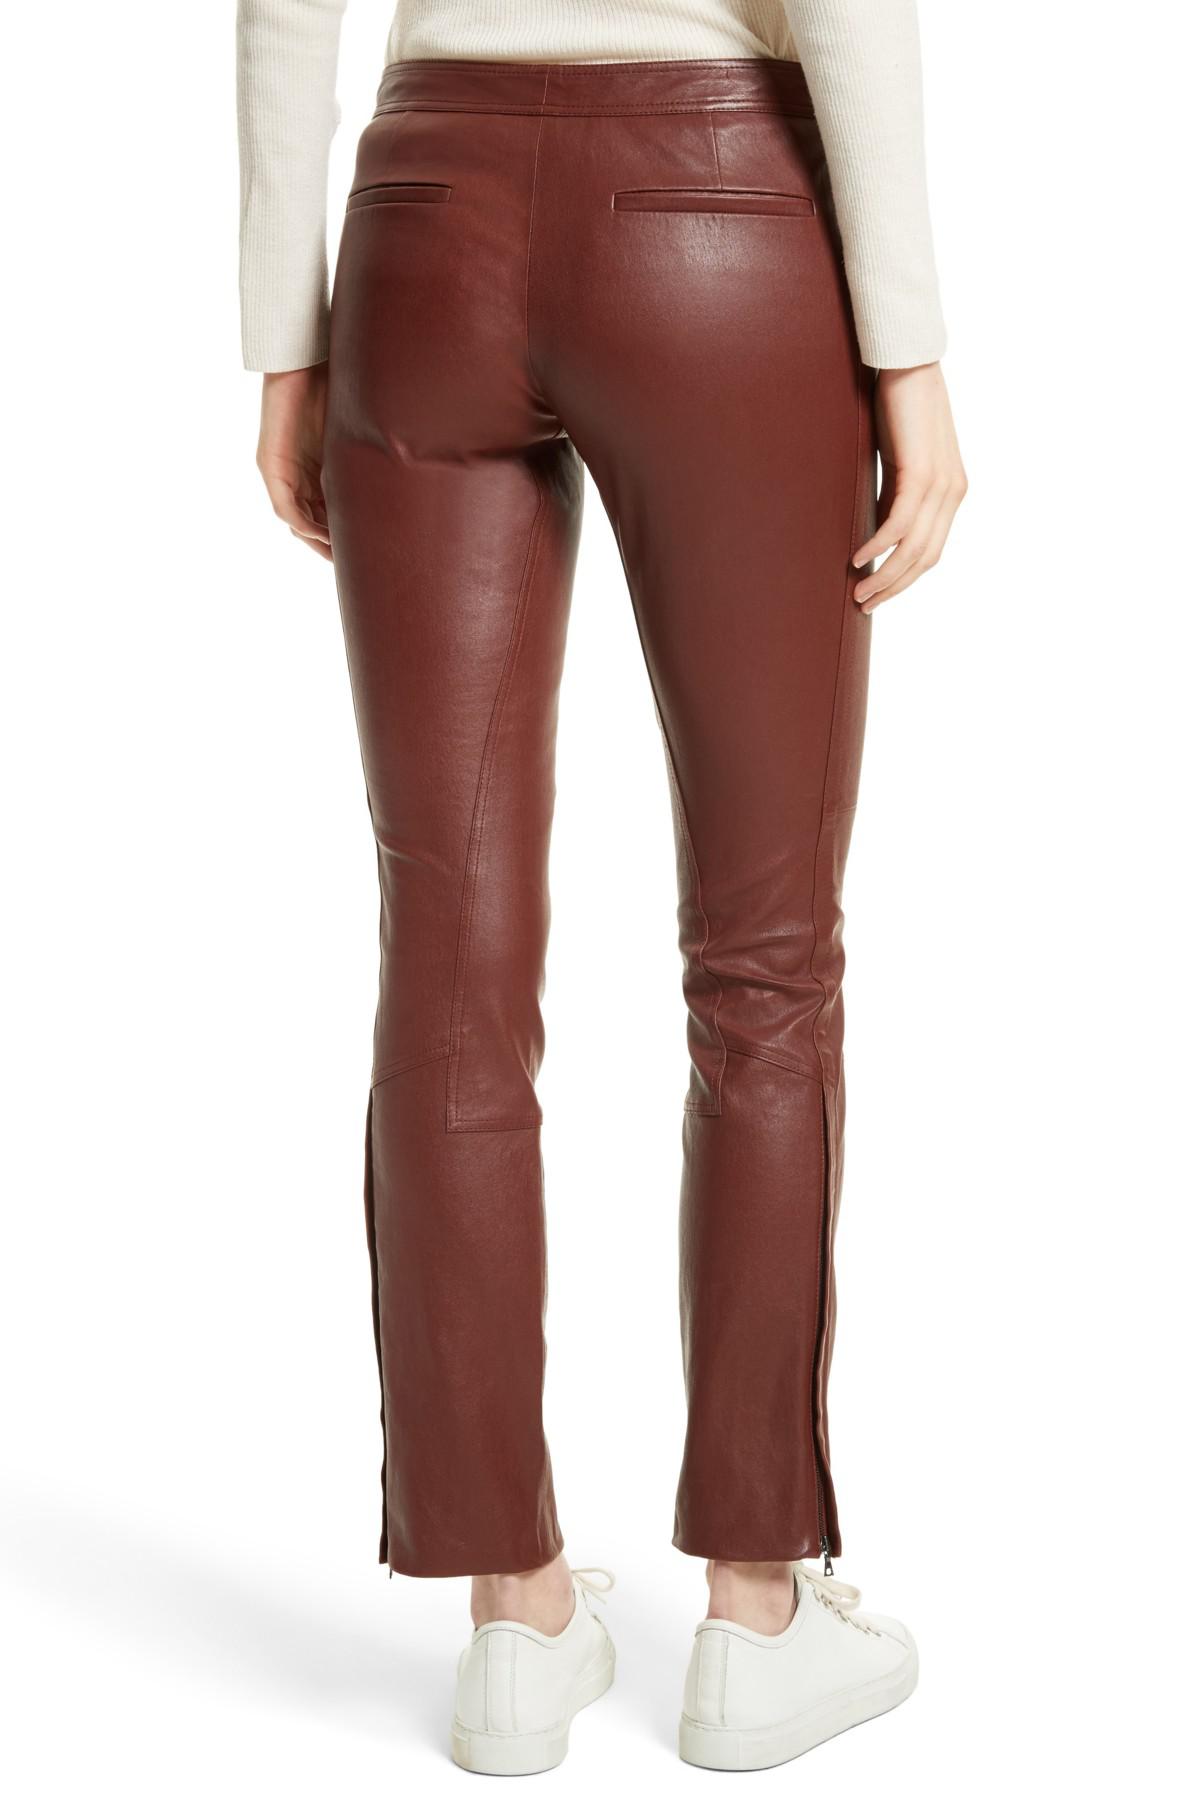 Theory Bristol Leather Riding Pants - Lyst